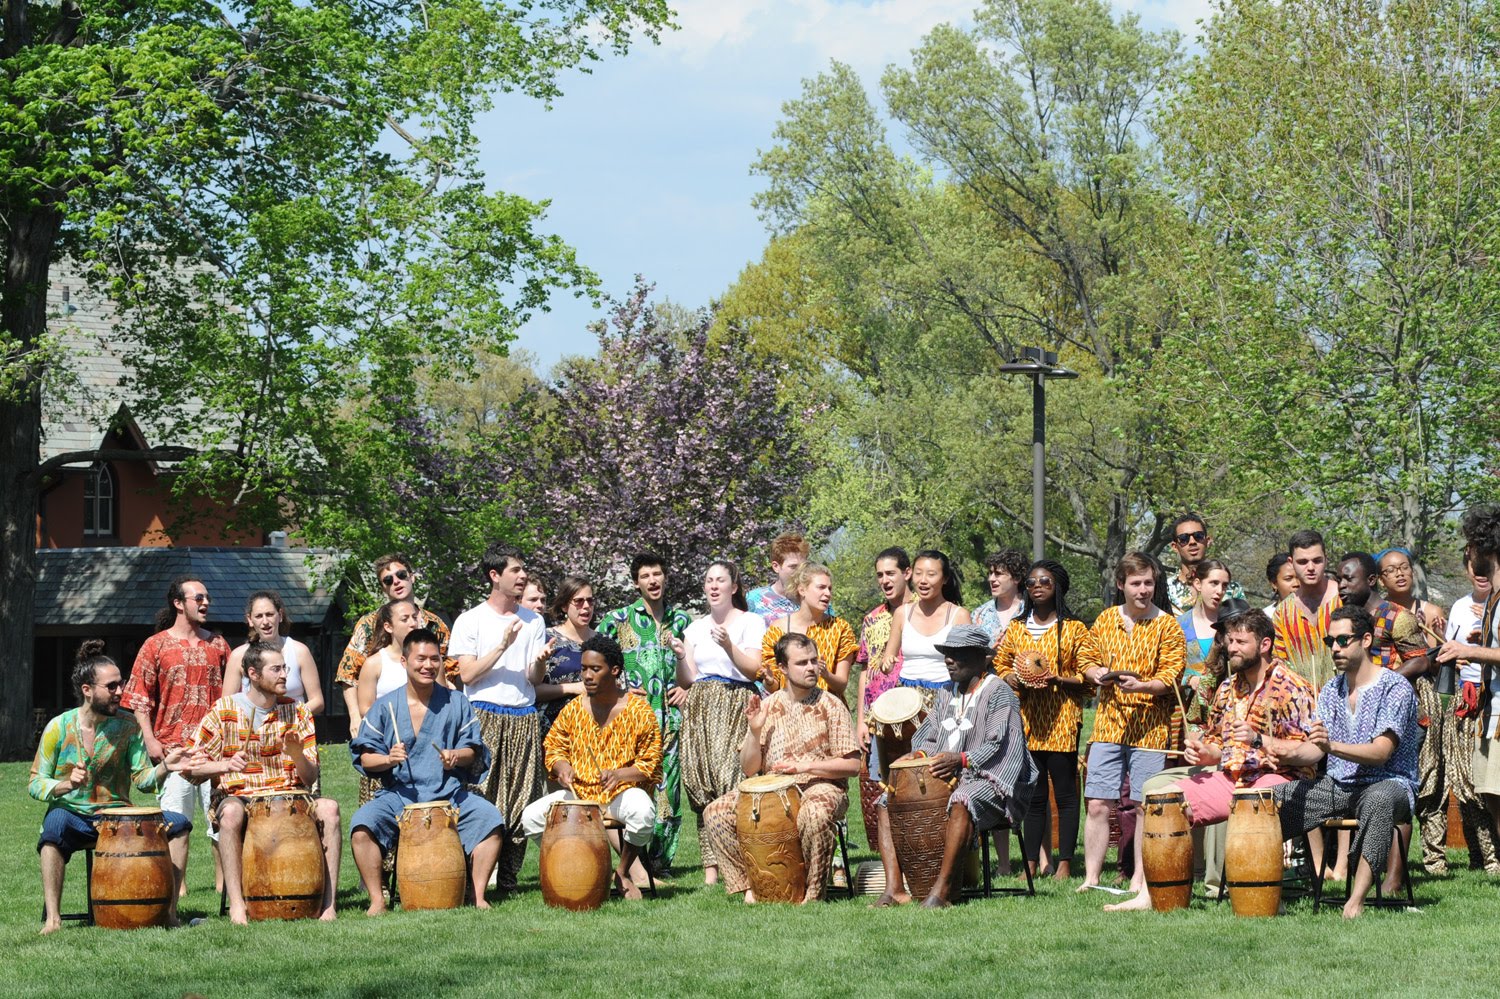 On May 8, the Wesleyan community gathered in the CFA Courtyard for an ivigorating performance filled with the rhythms of West Africa, featuring choreographer Iddi Saaka and master drummer Abraham Adzenyah with their students in three levels of “West African Dance” courses, plus guest artists.